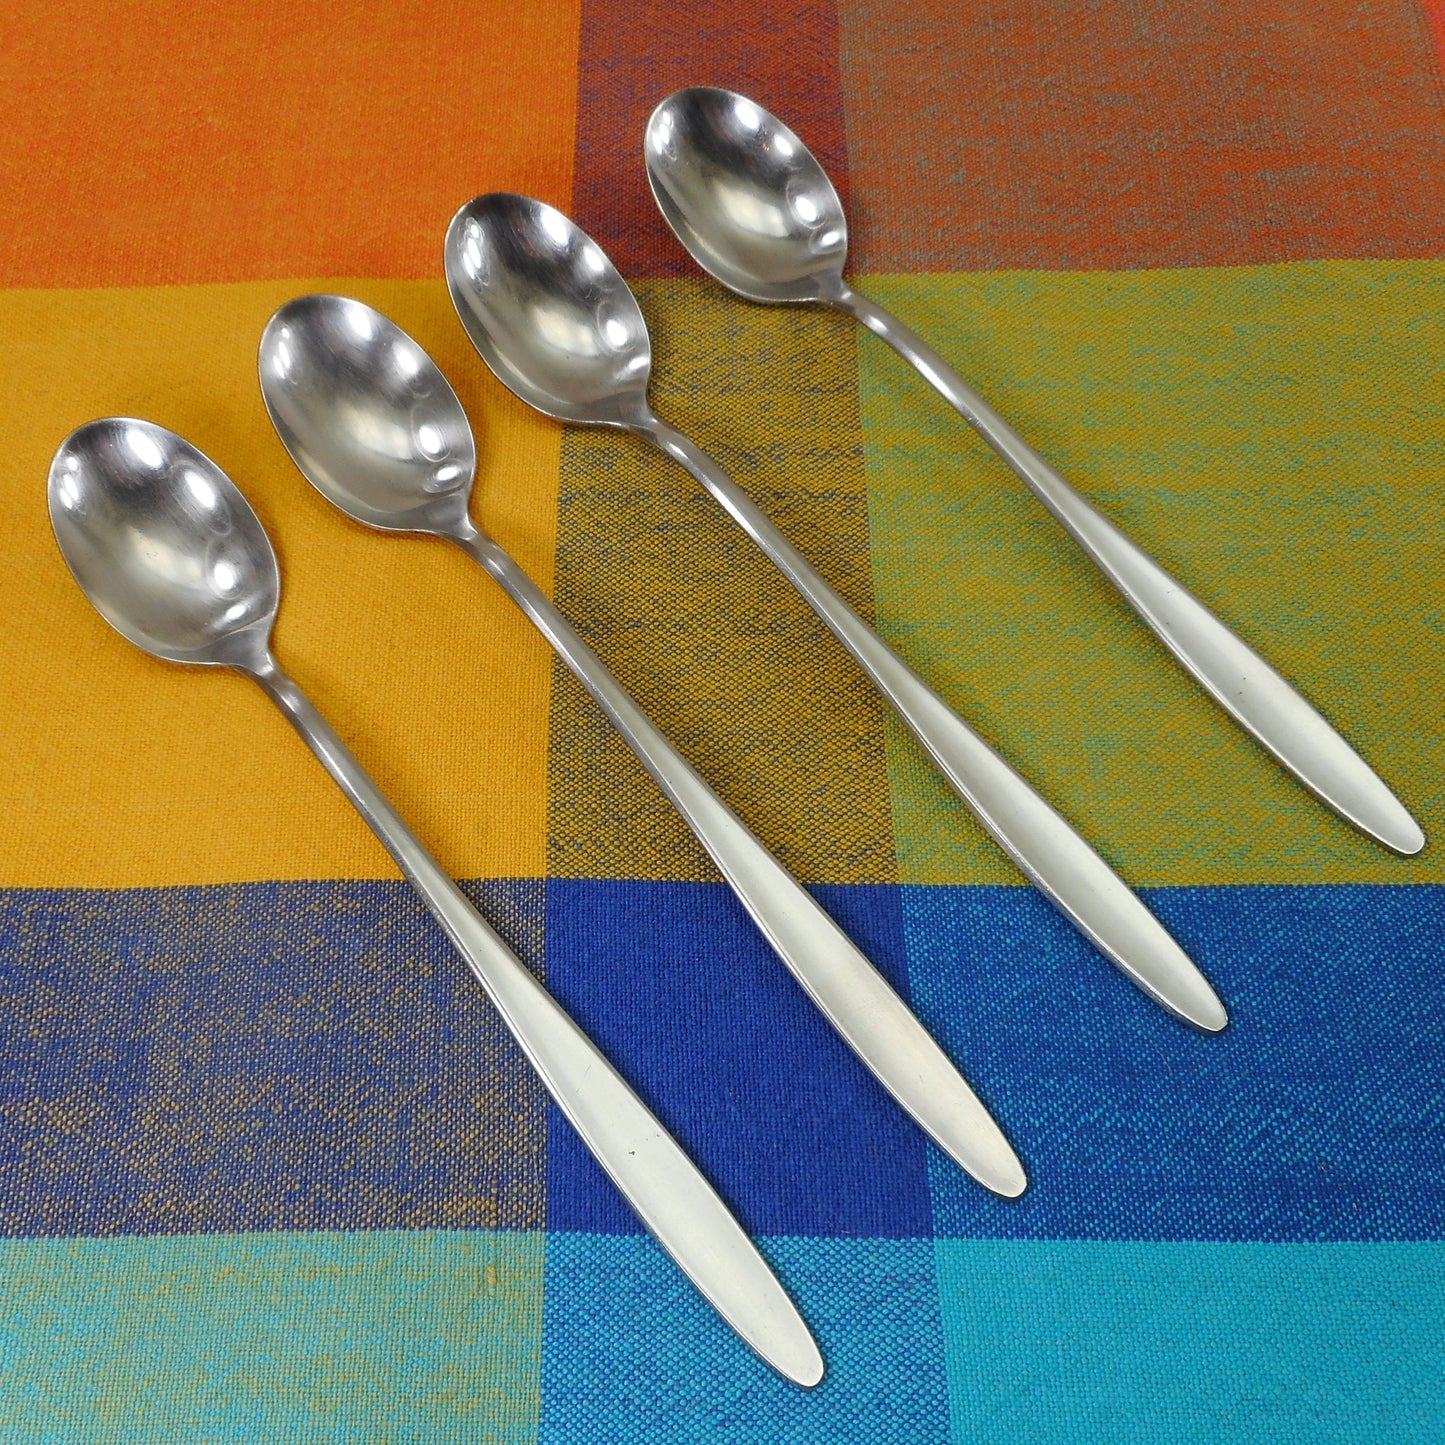 Amefa Stainless Flatware Unknown Pattern 4 Set Iced Tea Spoons - Plain Recessed Handle